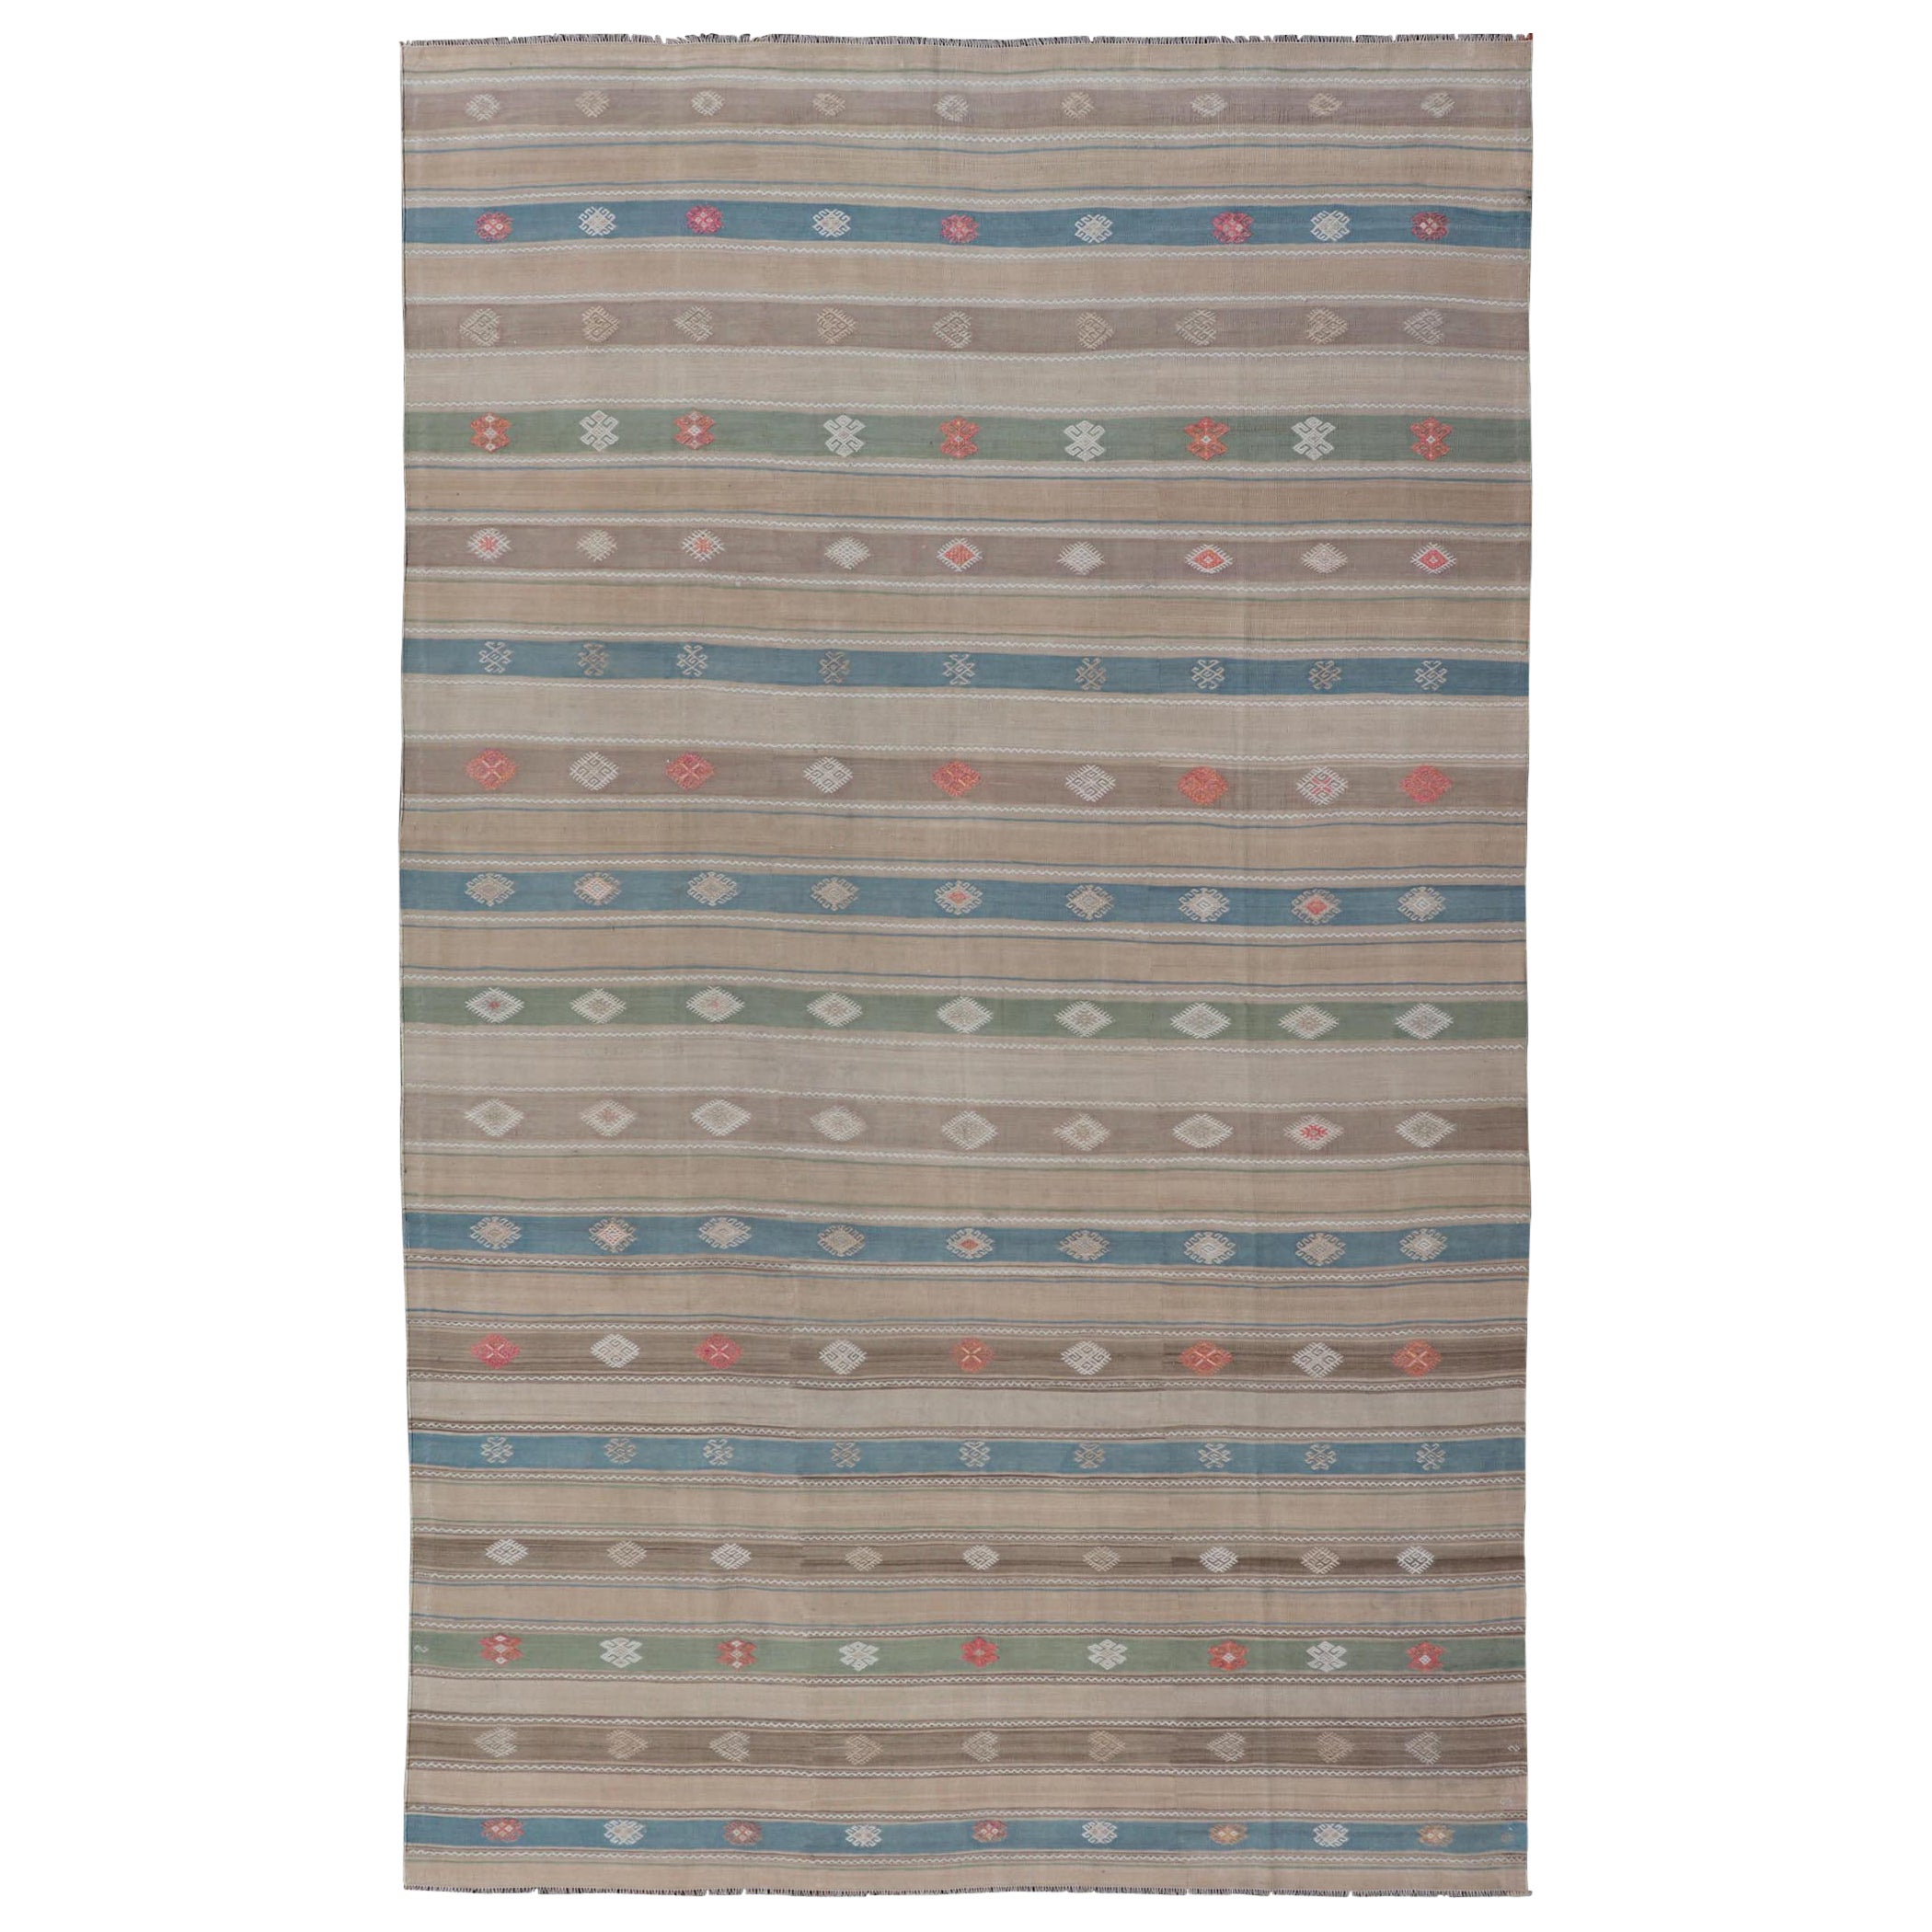 Vintage Hand-Woven Flatweave Kilim in Wool with Sub-Geometric Design and Motifs